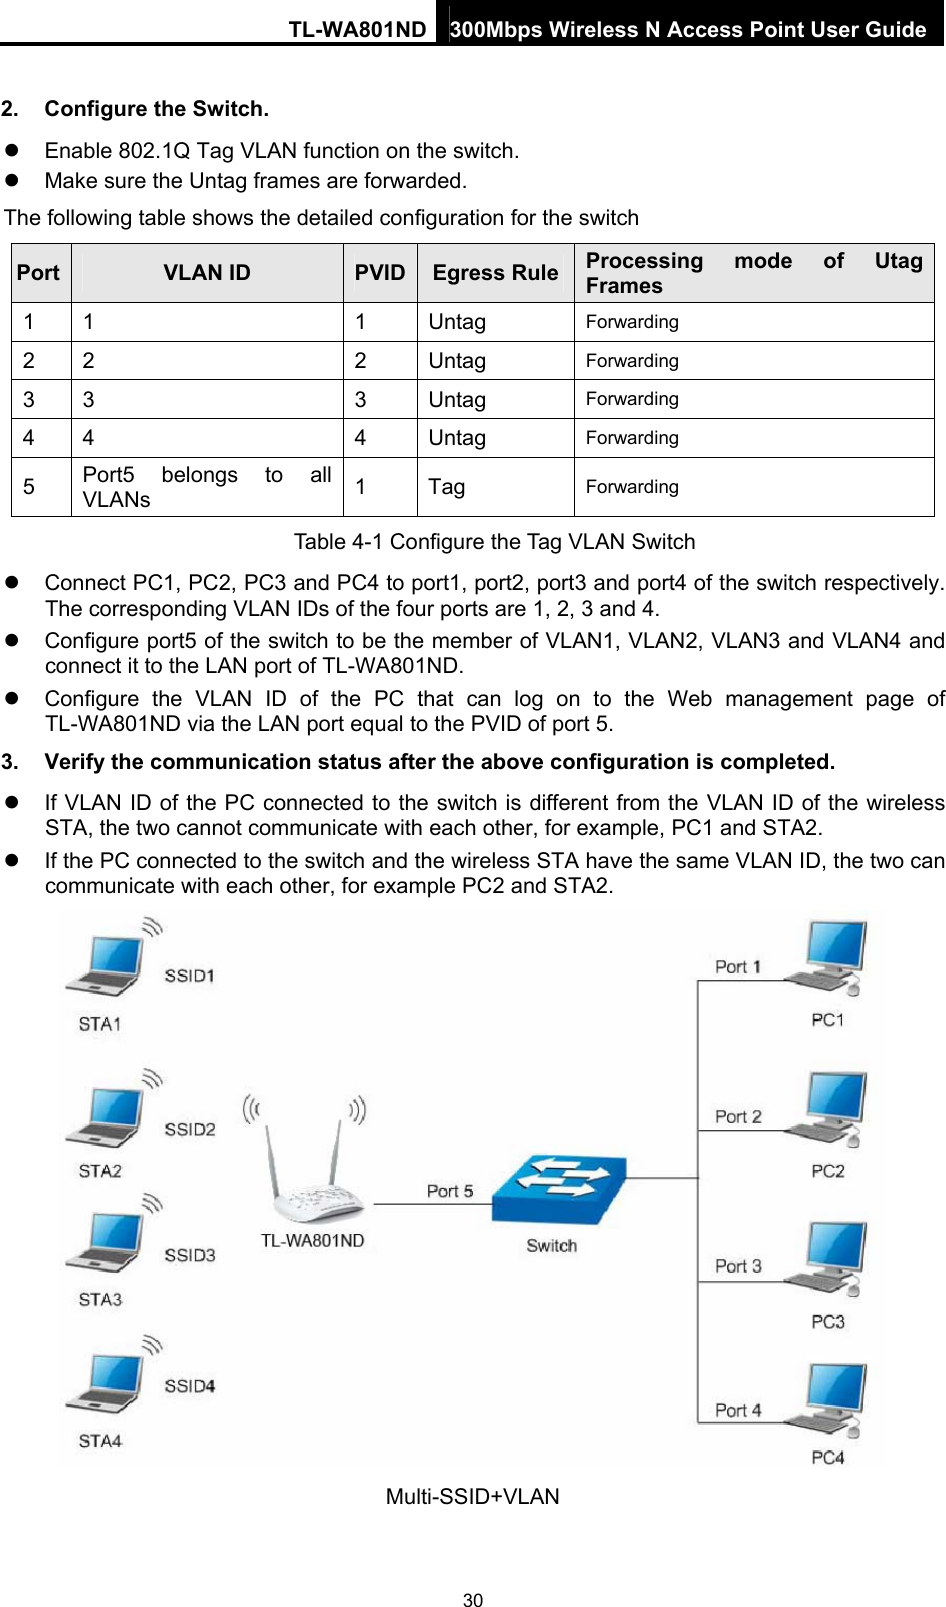 TL-WA801ND 300Mbps Wireless N Access Point User Guide 2.  Configure the Switch.   Enable 802.1Q Tag VLAN function on the switch.   Make sure the Untag frames are forwarded. The following table shows the detailed configuration for the switch   Port  VLAN ID  PVID Egress Rule Processing mode of Utag Frames 1 1  1  Untag  Forwarding 2 2  2  Untag  Forwarding 3 3  3  Untag  Forwarding  4 4  4  Untag  Forwarding 5  Port5 belongs to all VLANs  1 Tag  Forwarding Table 4-1 Configure the Tag VLAN Switch   Connect PC1, PC2, PC3 and PC4 to port1, port2, port3 and port4 of the switch respectively. The corresponding VLAN IDs of the four ports are 1, 2, 3 and 4.   Configure port5 of the switch to be the member of VLAN1, VLAN2, VLAN3 and VLAN4 and connect it to the LAN port of TL-WA801ND.   Configure the VLAN ID of the PC that can log on to the Web management page of TL-WA801ND via the LAN port equal to the PVID of port 5. 3.  Verify the communication status after the above configuration is completed.   If VLAN ID of the PC connected to the switch is different from the VLAN ID of the wireless STA, the two cannot communicate with each other, for example, PC1 and STA2.   If the PC connected to the switch and the wireless STA have the same VLAN ID, the two can communicate with each other, for example PC2 and STA2.  Multi-SSID+VLAN 30 